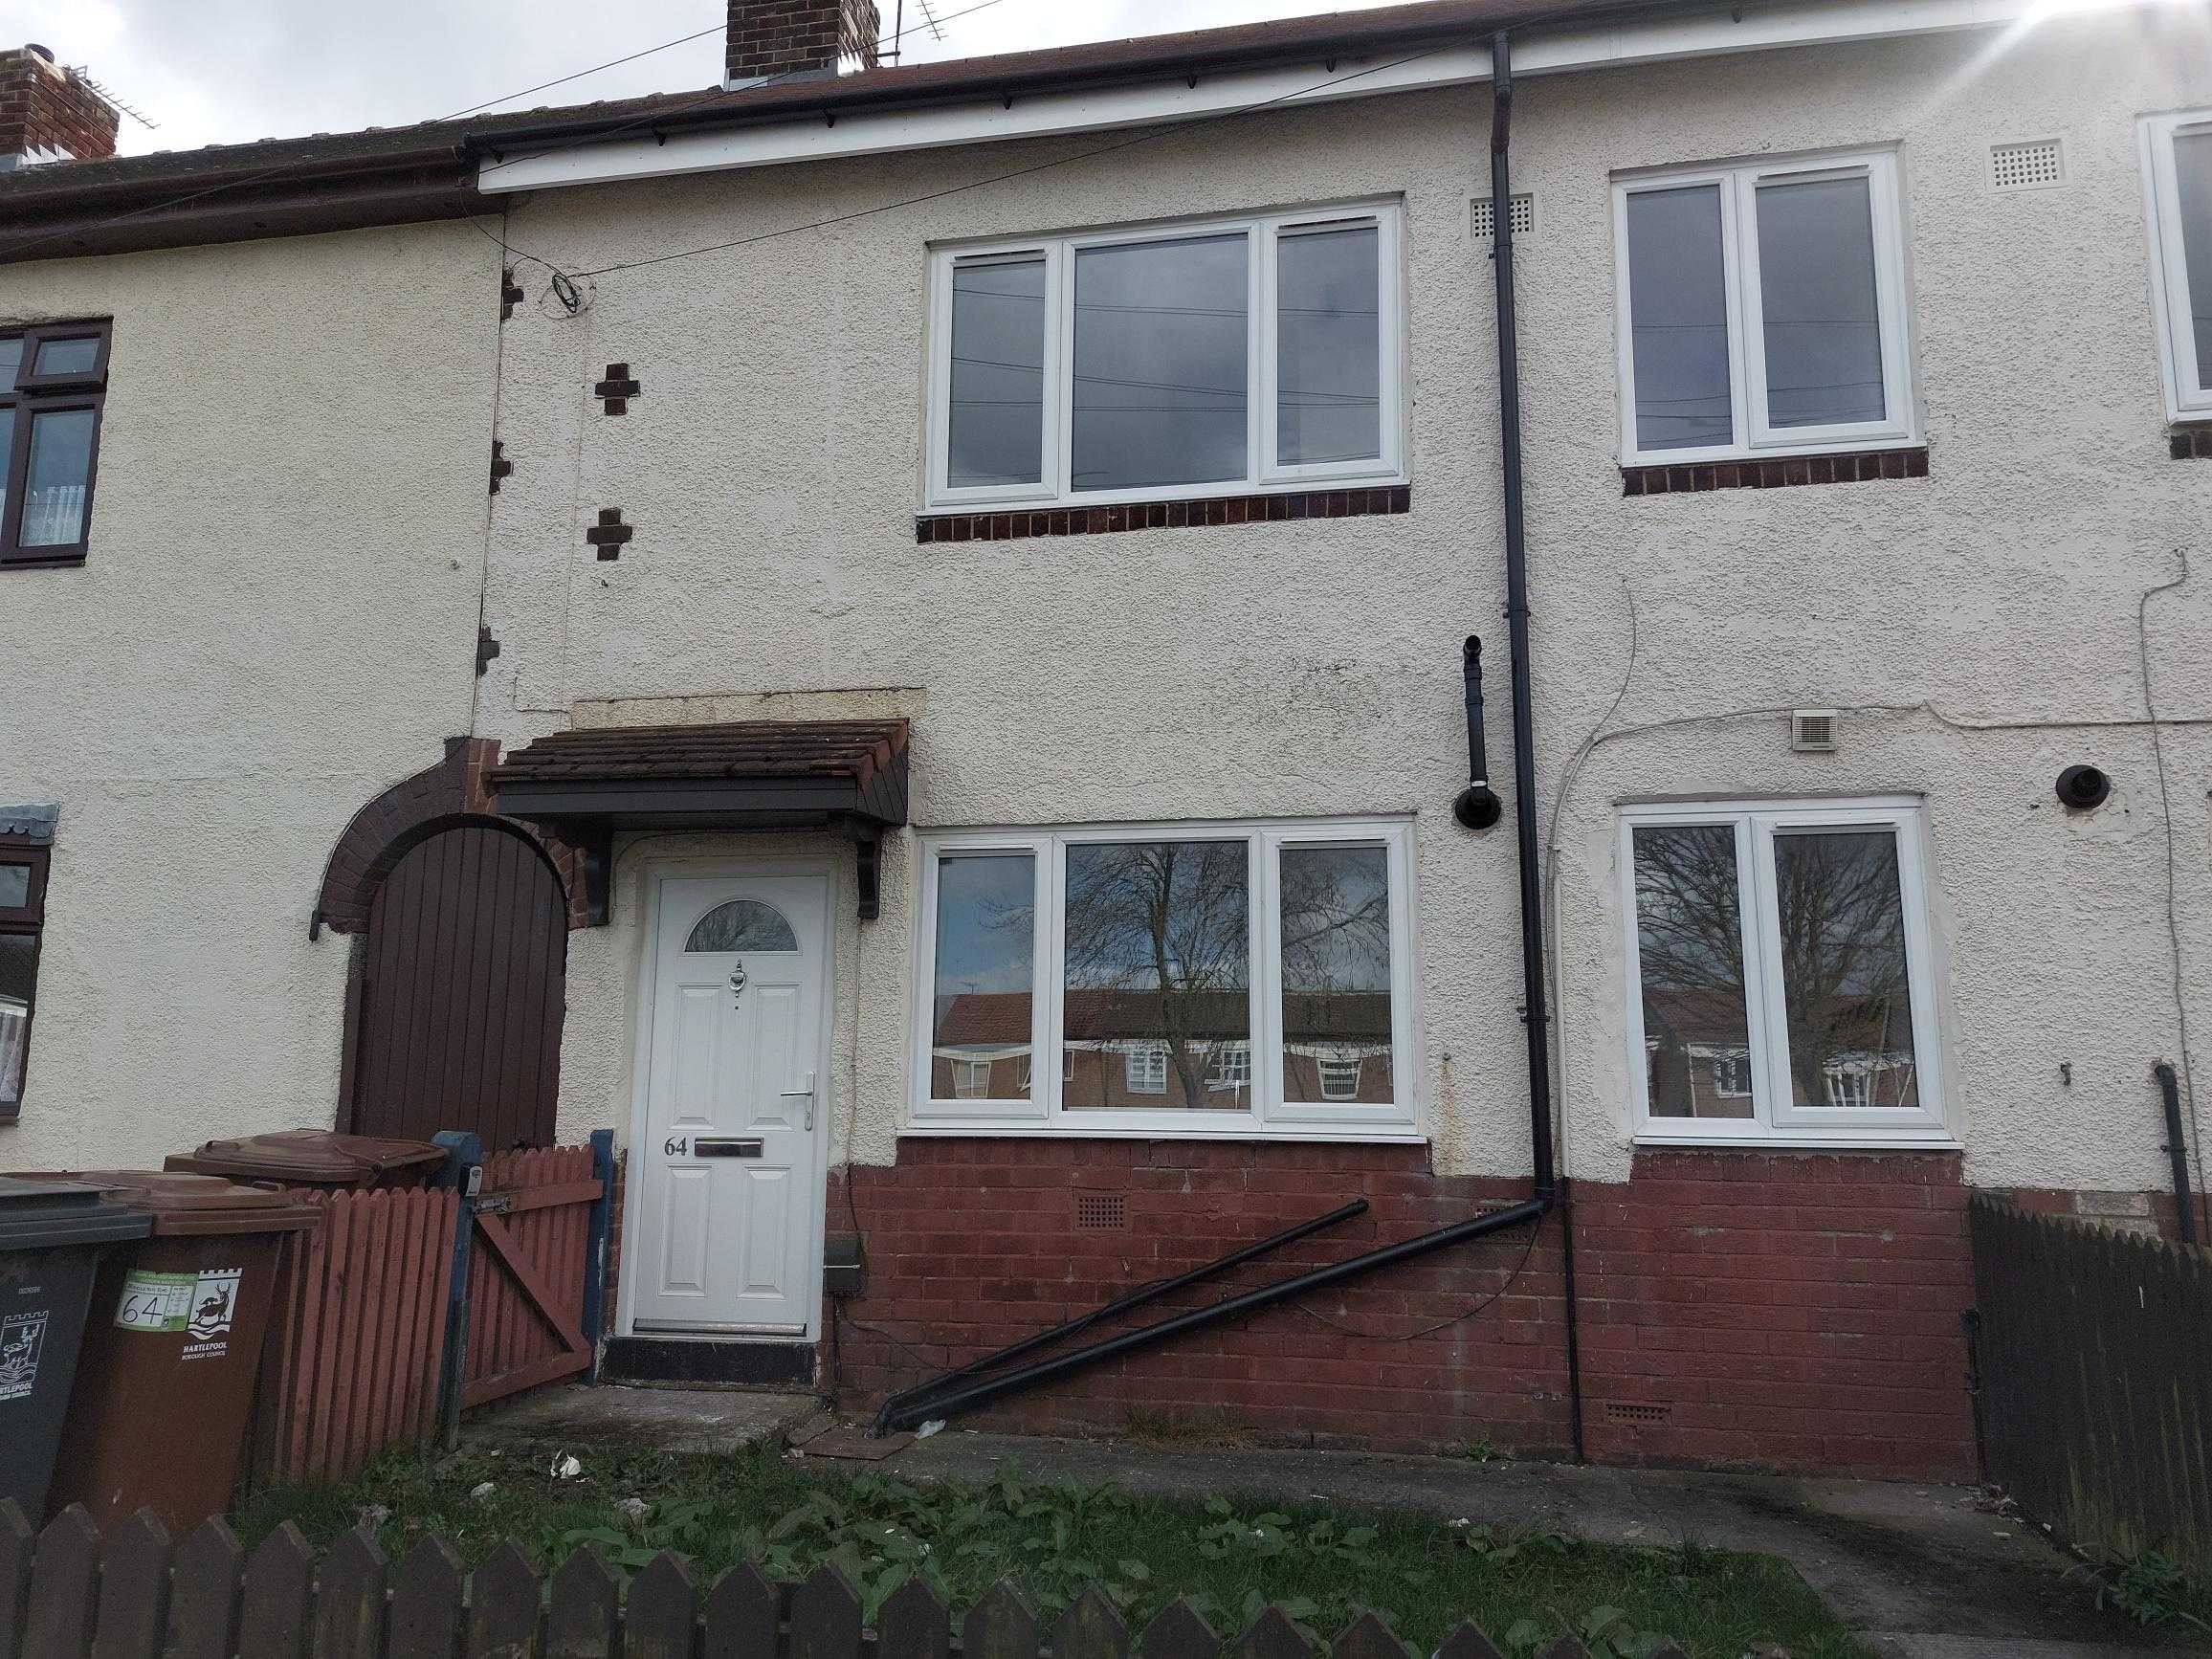 3 Bedroom House Clarence Estate Hartlepool